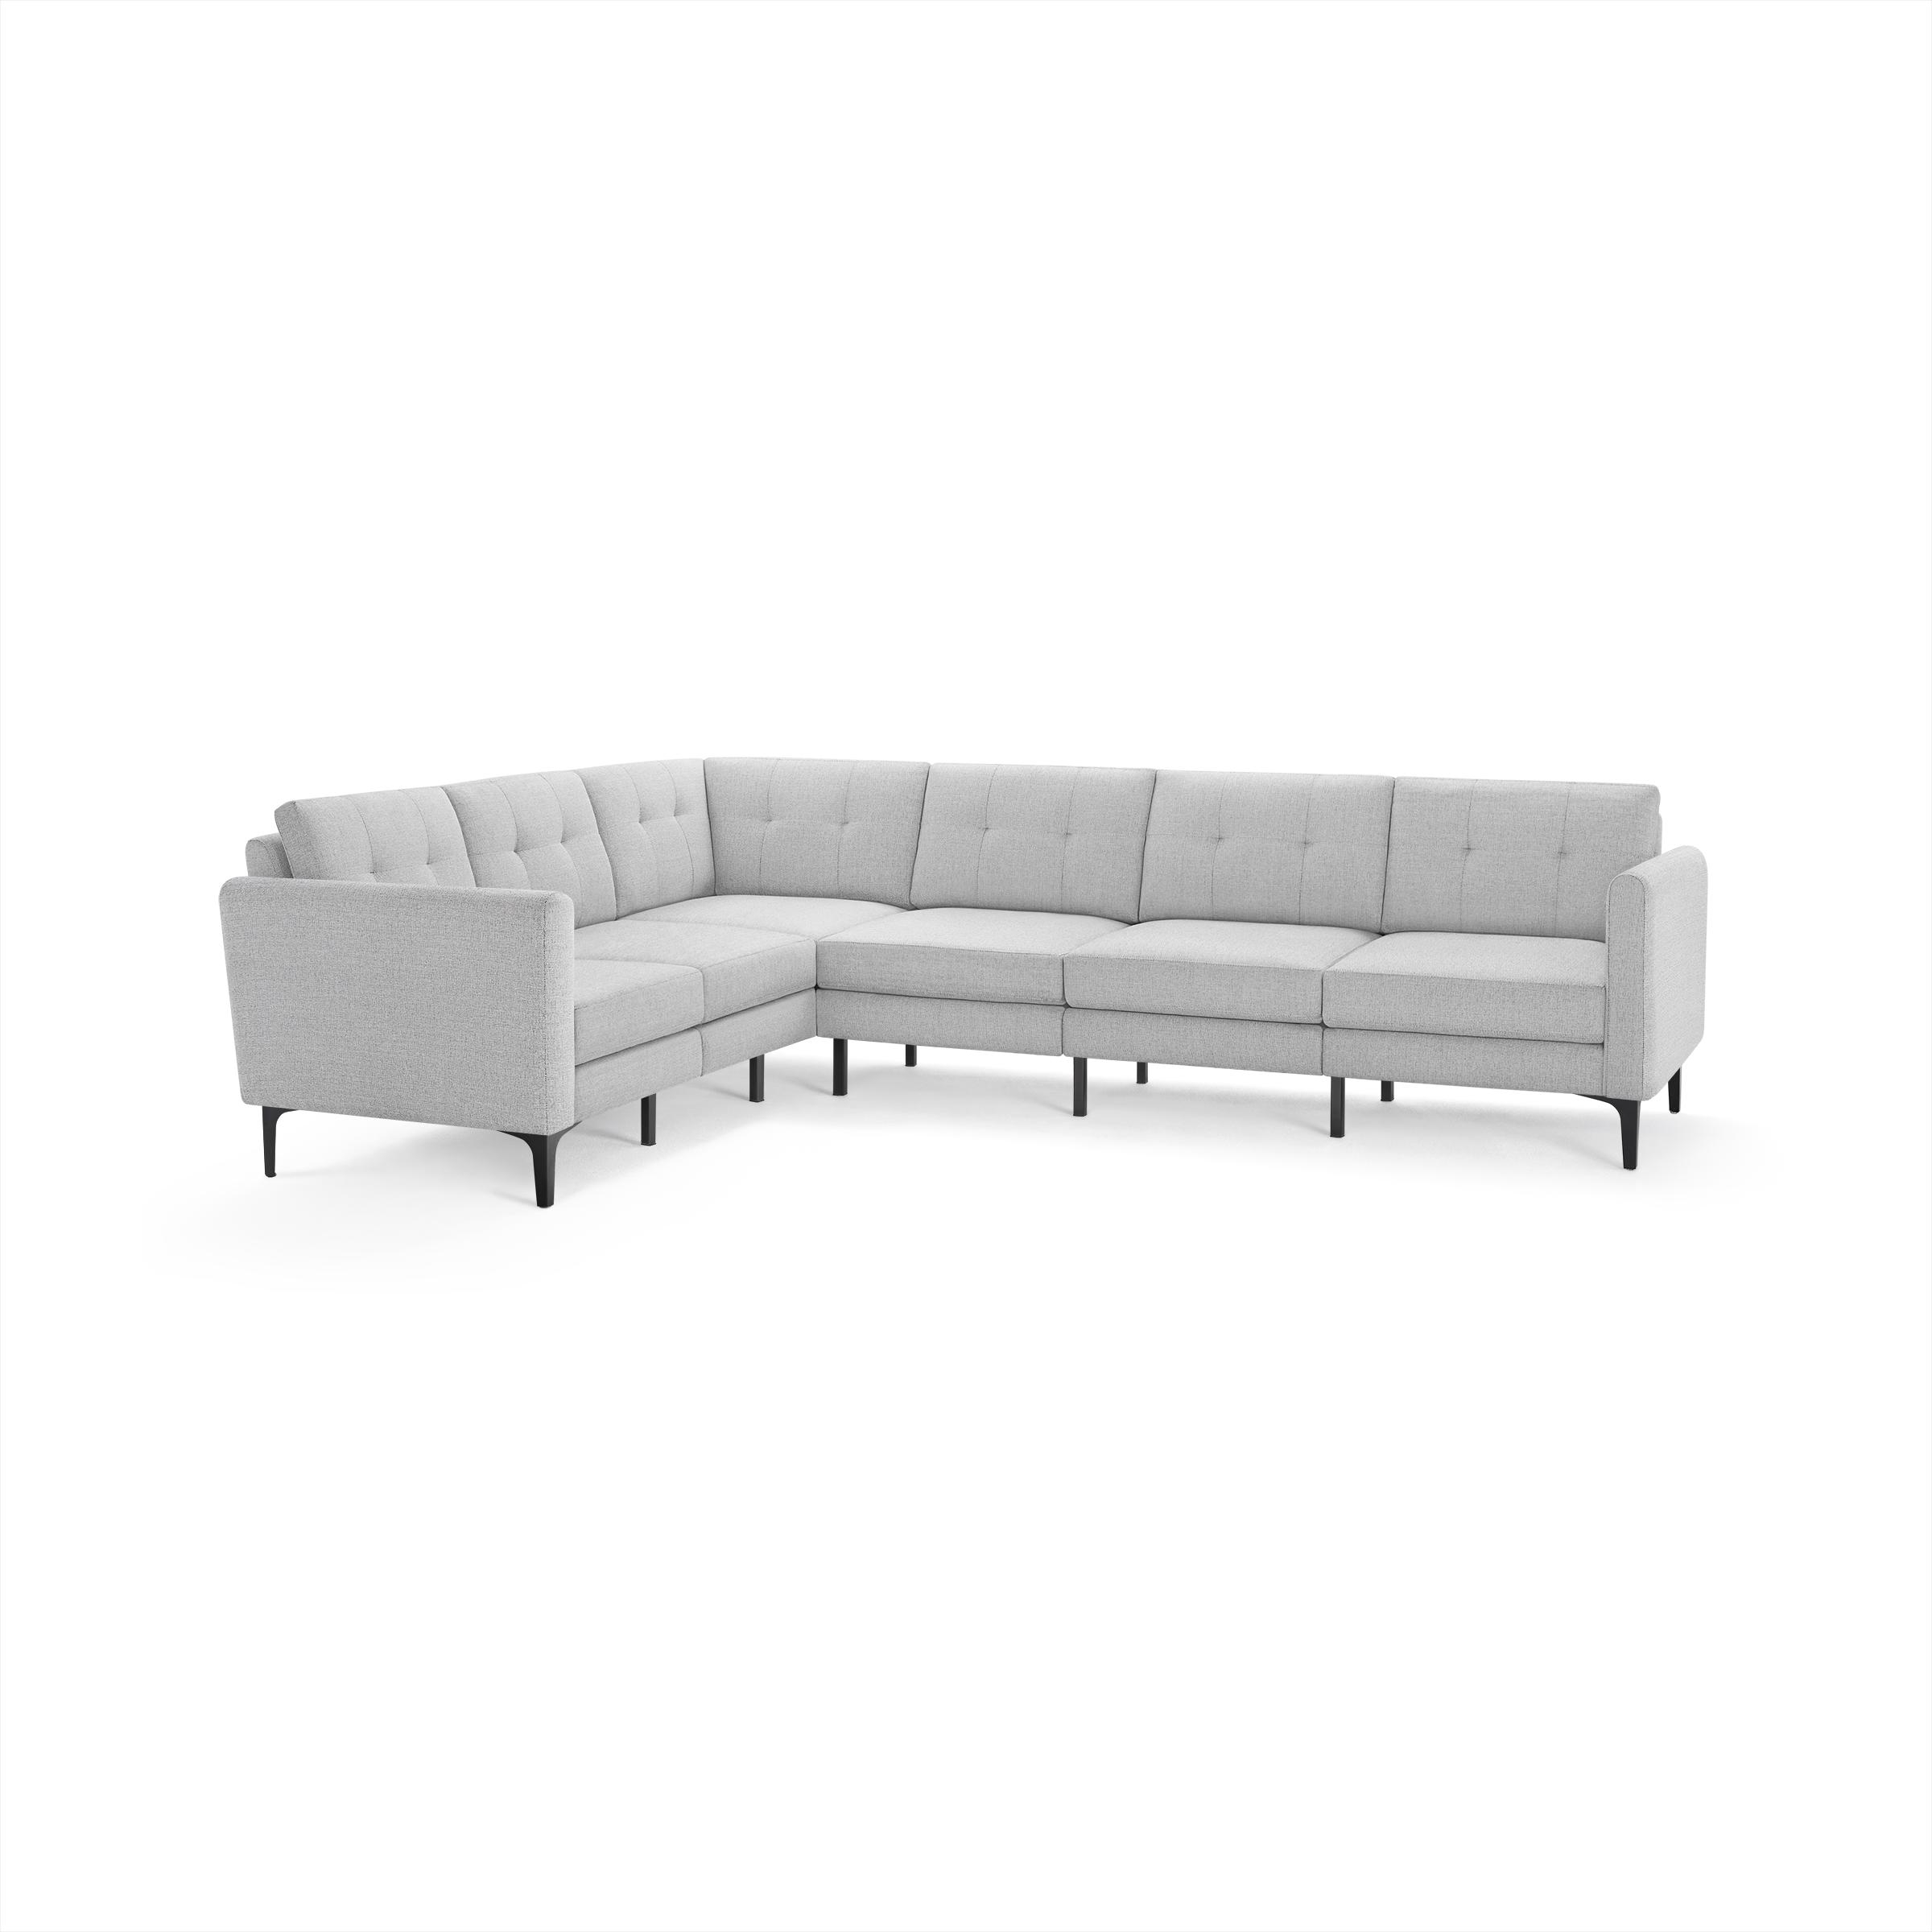 Nomad 6-Seat Corner Sectional in Crushed Gravel - Image 1